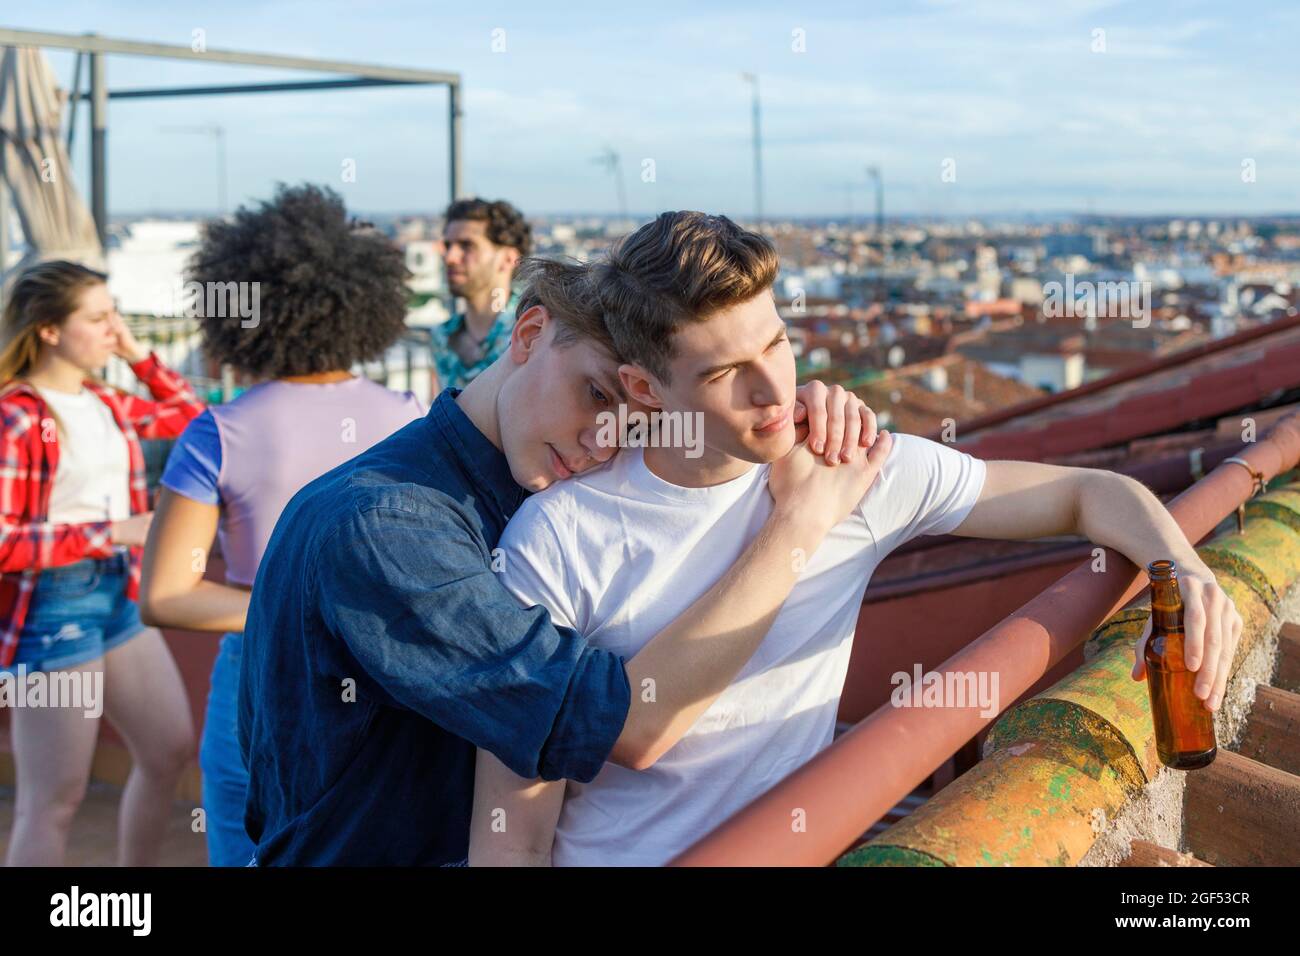 Young man embracing male friend on terrace during party Stock Photo